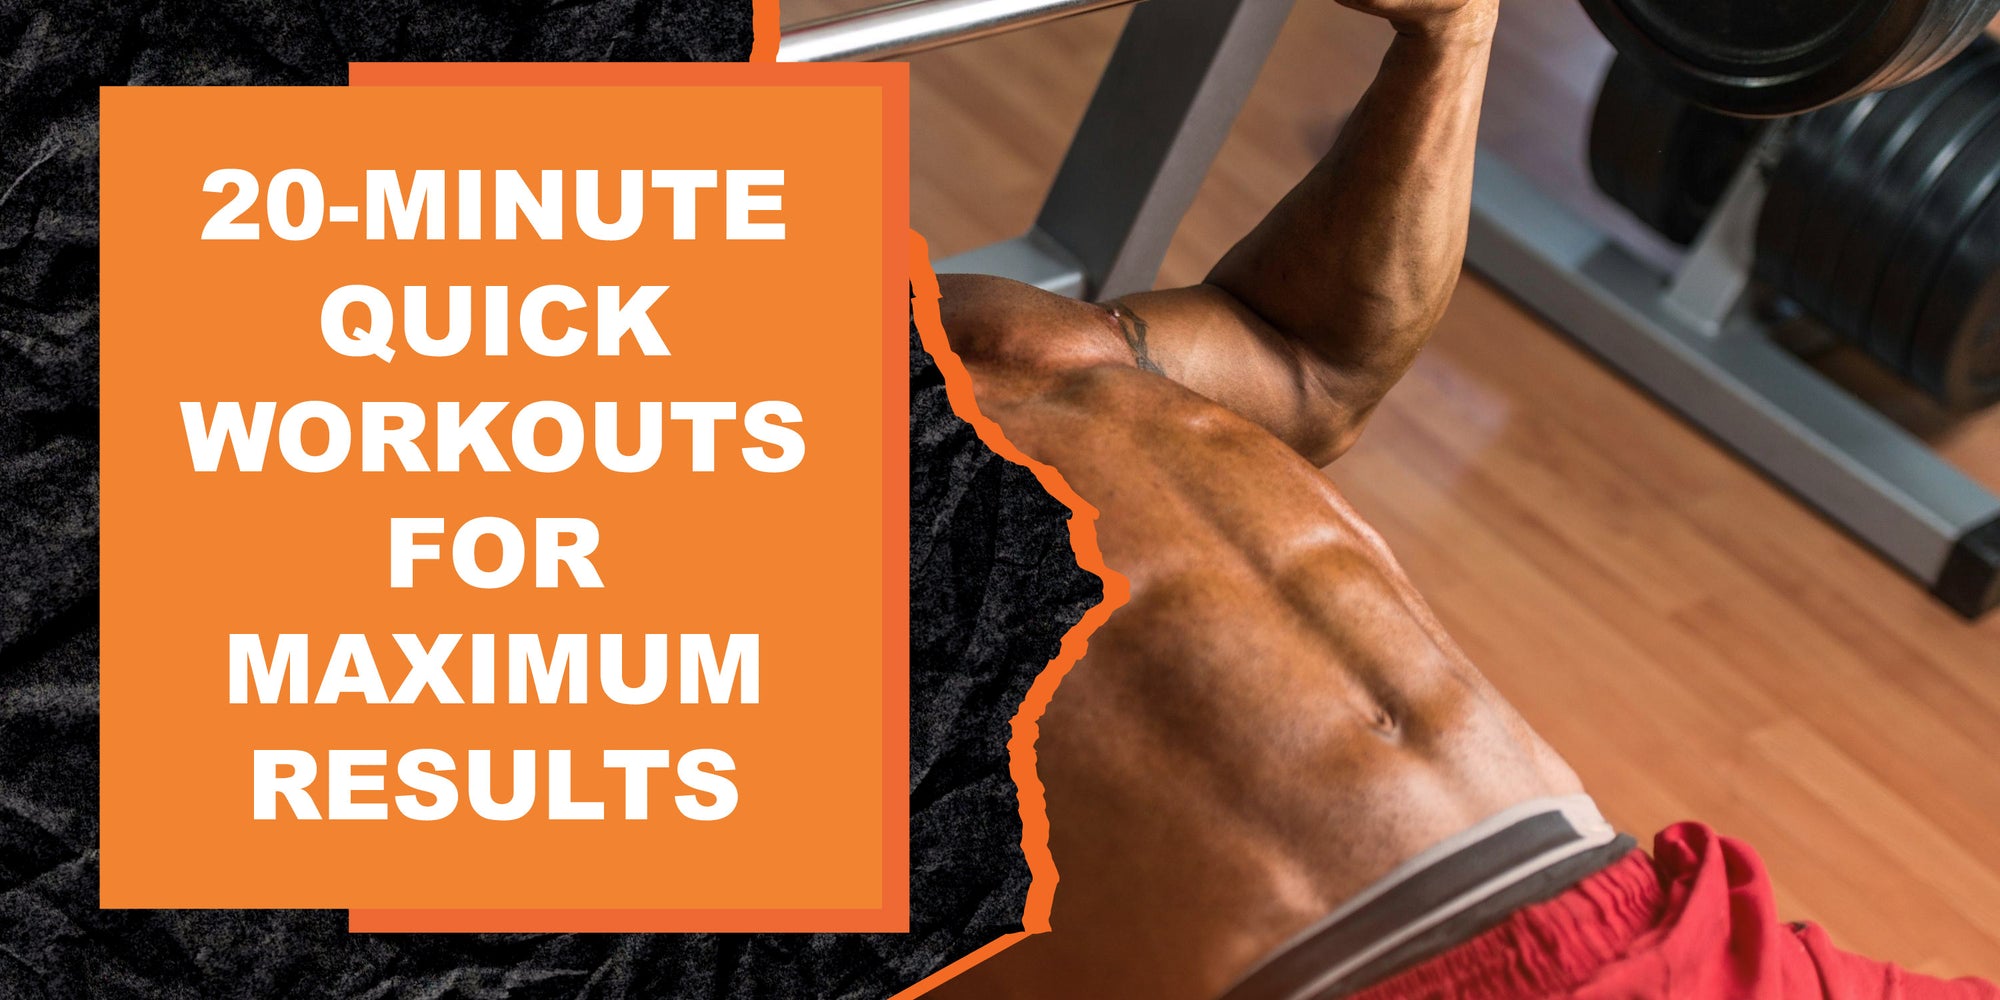 20-Minute Quick Workouts for Maximum Results